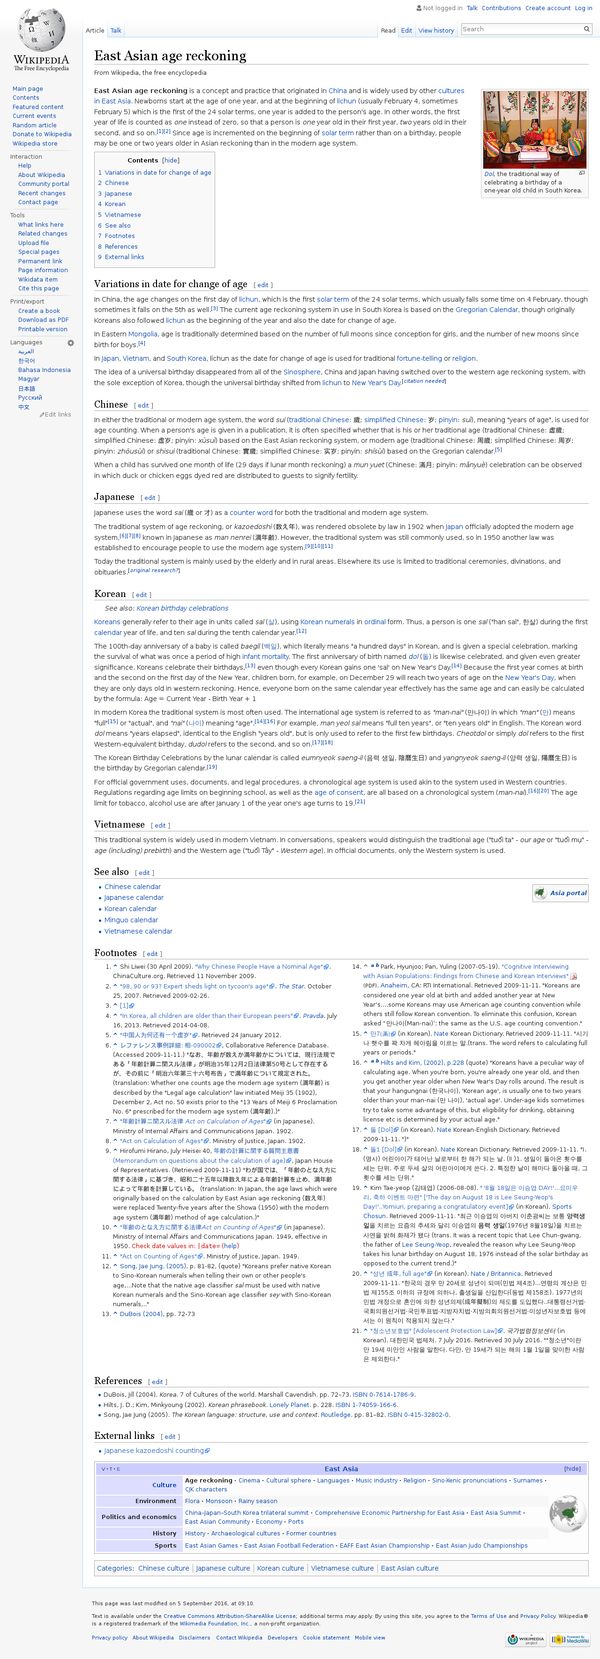 East Asian age reckoning - Wikipedia